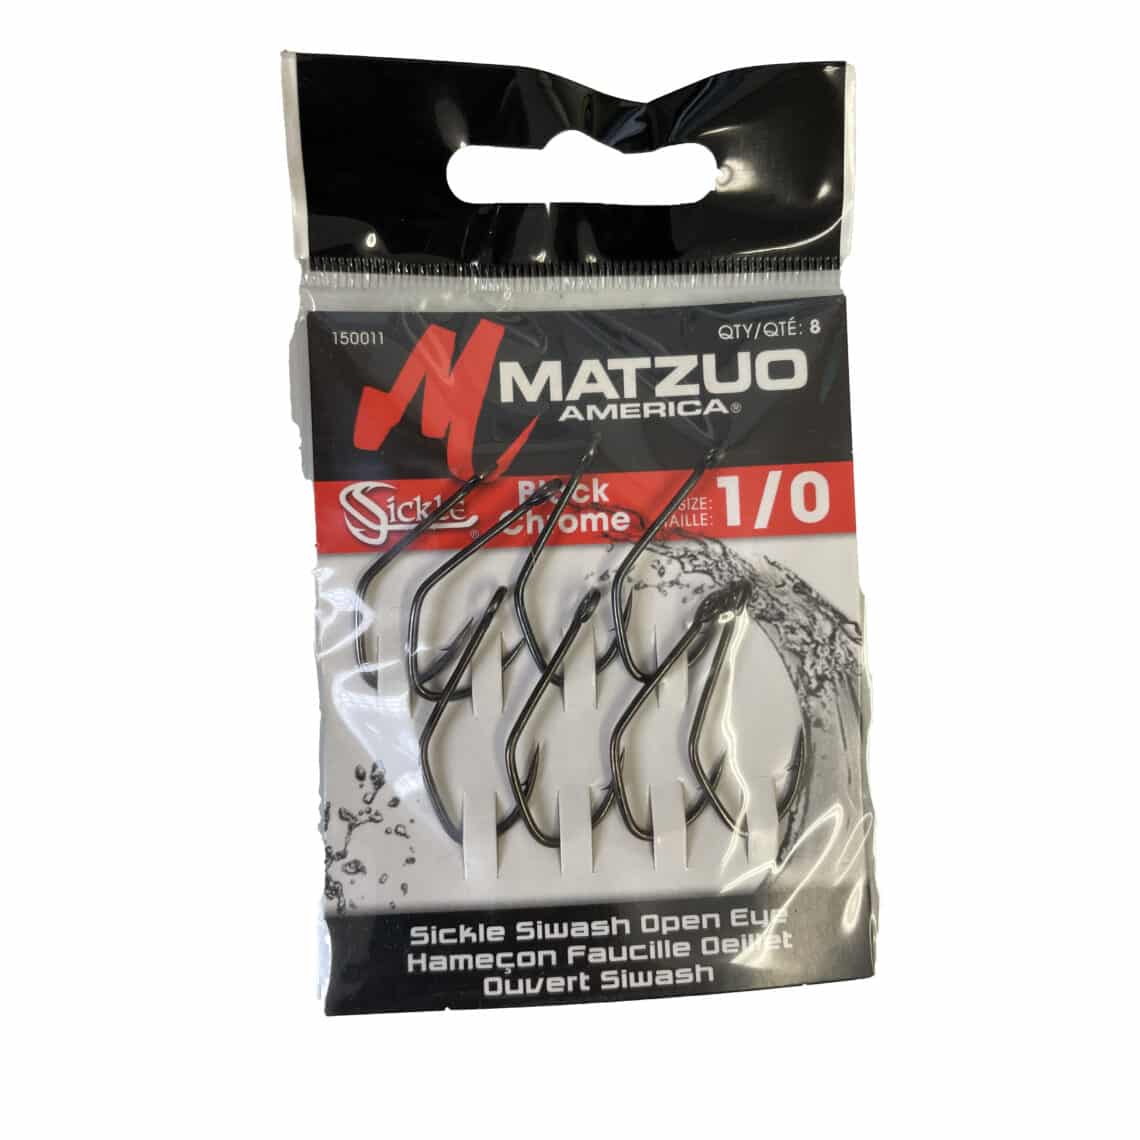 CLOSEOUT * MATZUO SICKLE BLACK CHROME HOOK SIZE 1/0 - 8 PACK - Northwoods  Wholesale Outlet